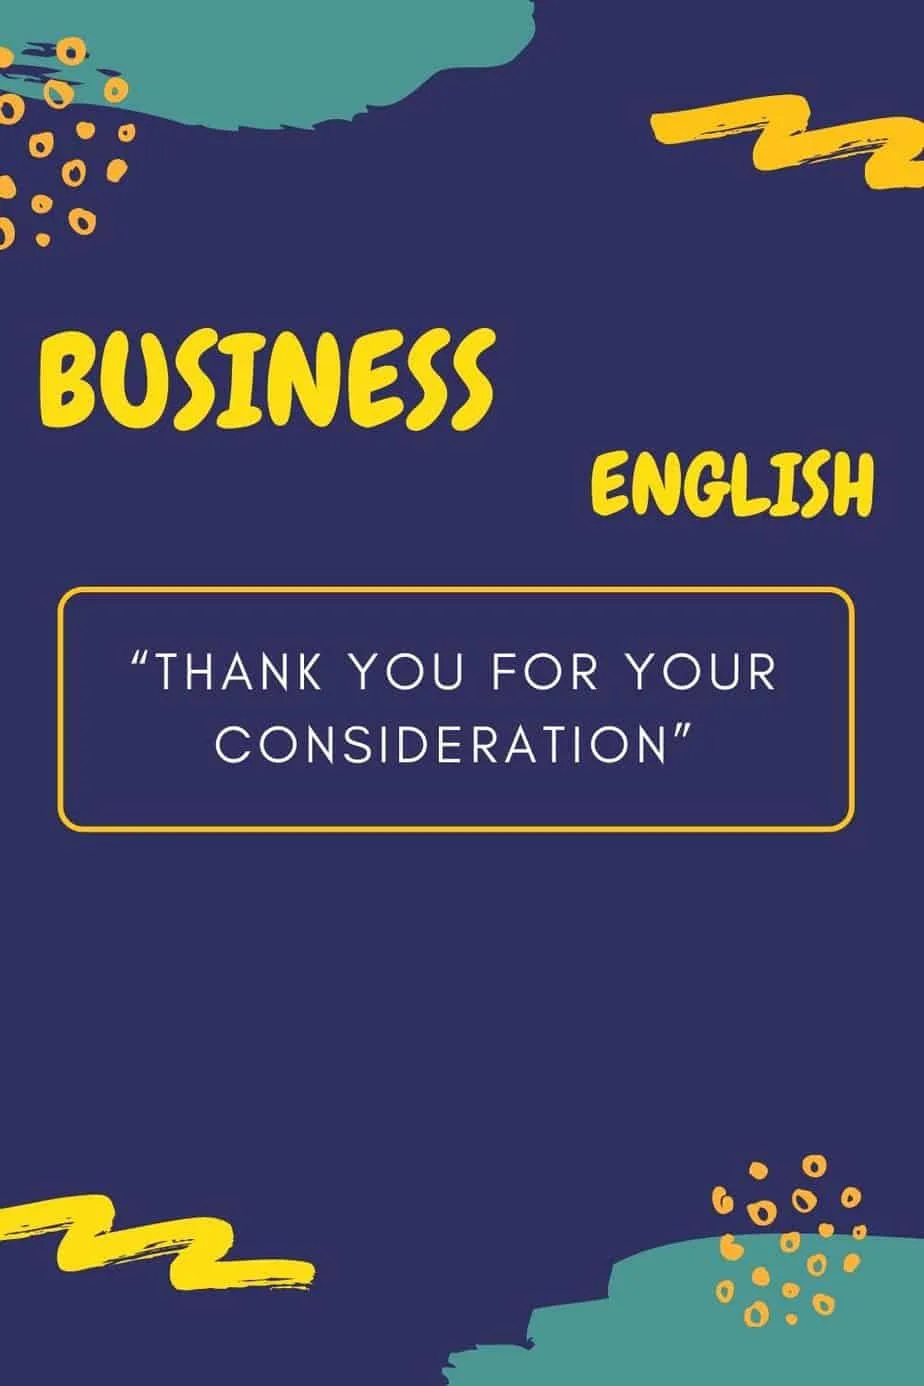 Business ENGLISH Thank you for your consideration_